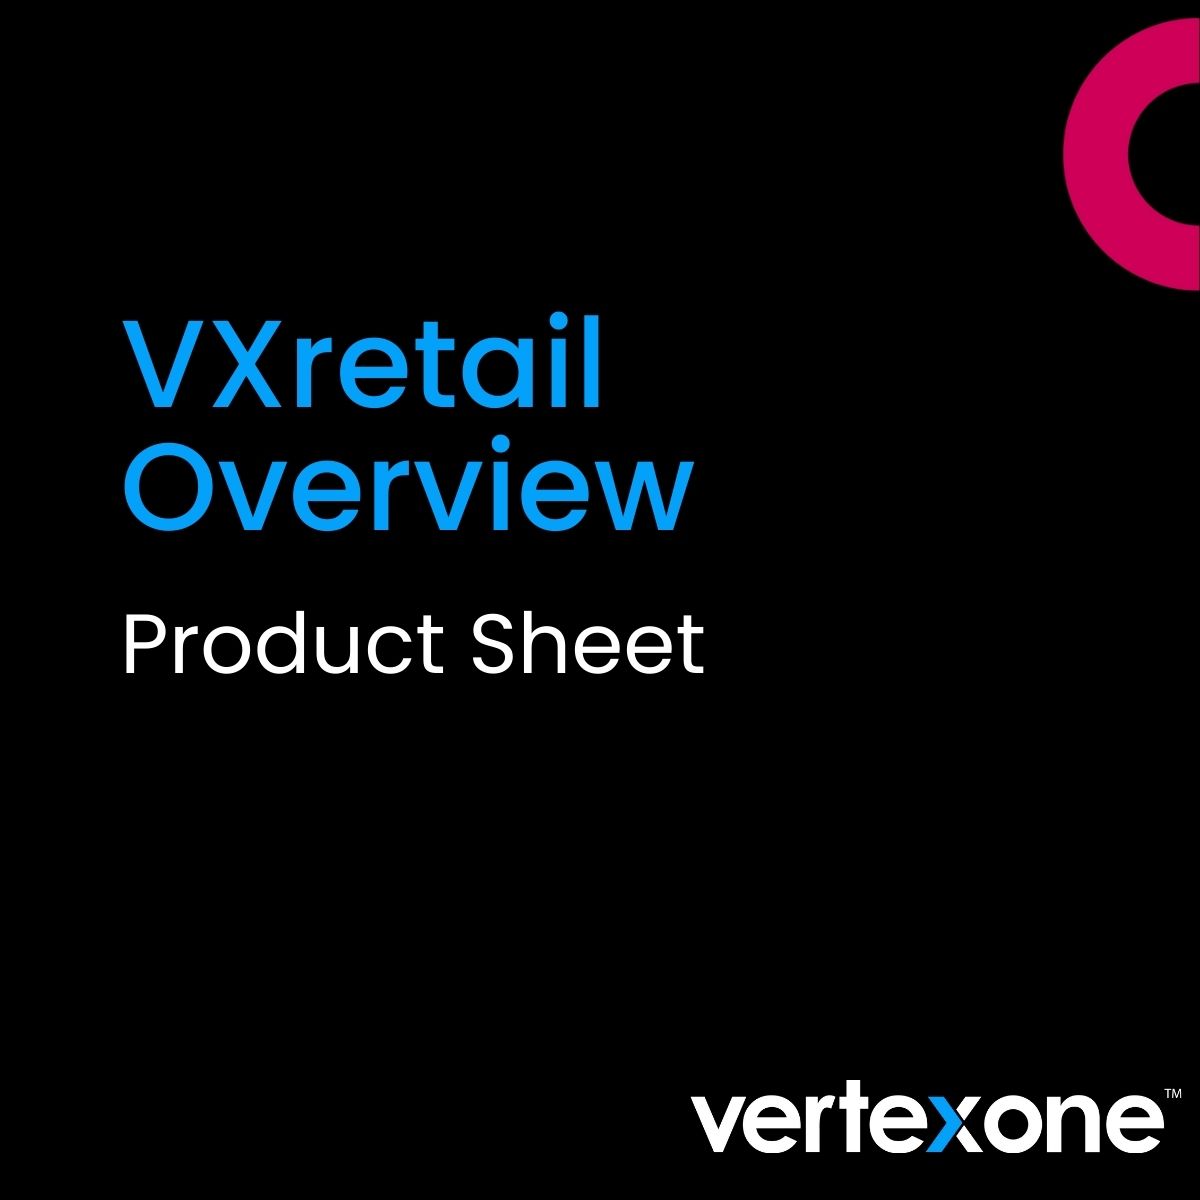 VXretail Overview Product Sheet